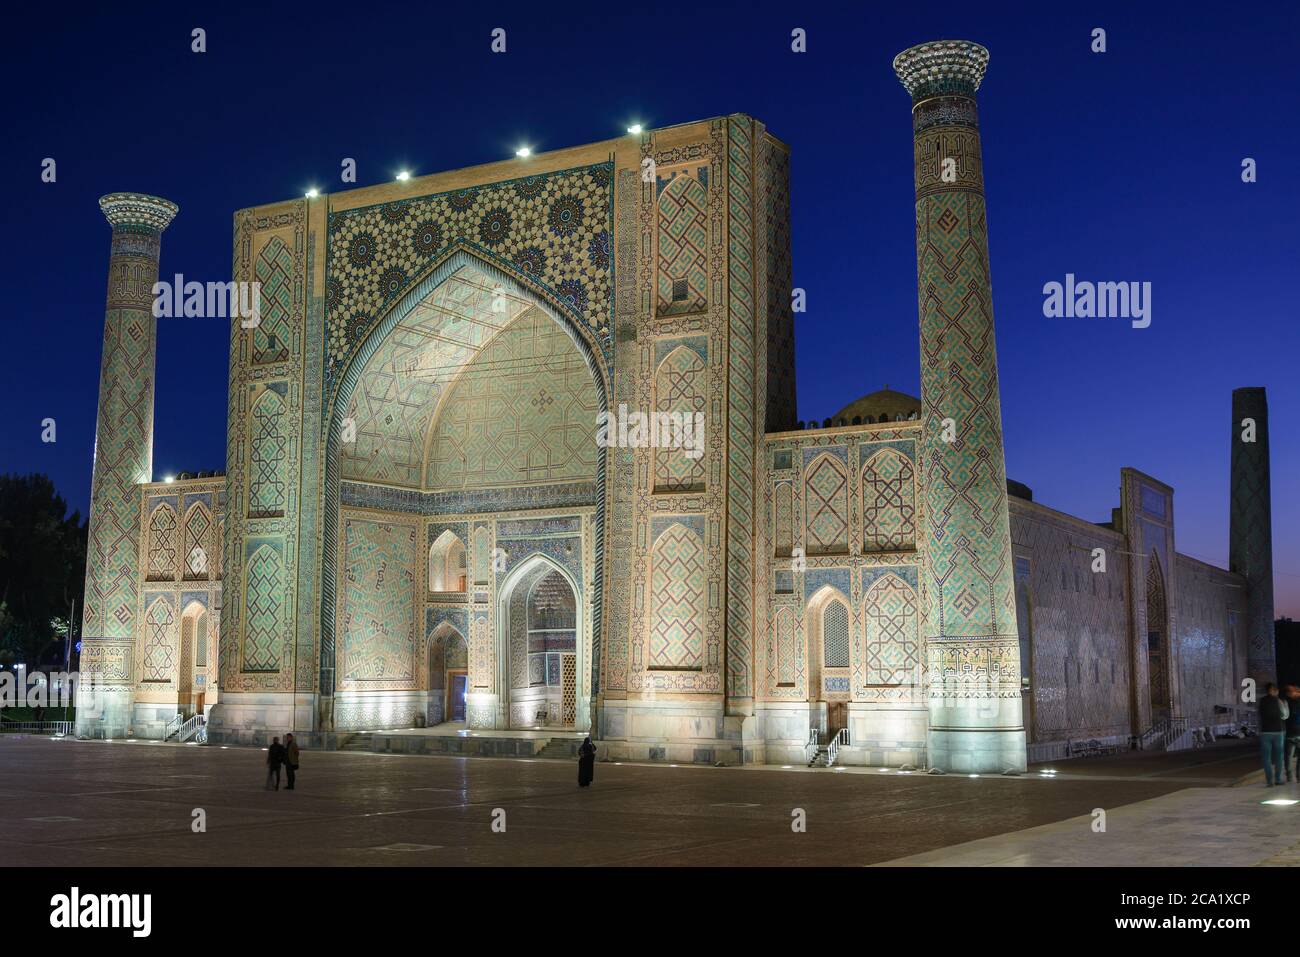 Ulugh Beg Madrasah illuminated at night in the Registan, Samarkand, Uzbekistan. Islamic building with towers and big iwan decorated with ceramic tiles Stock Photo